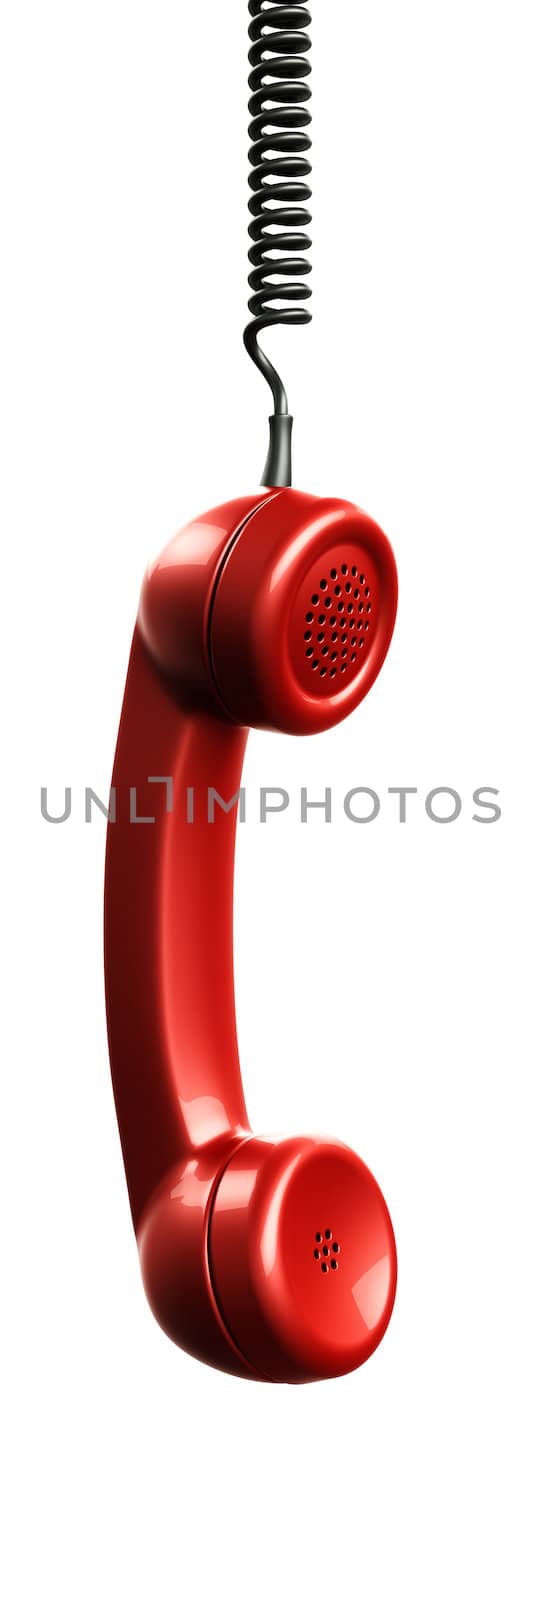 handset from vintage phone by zentilia